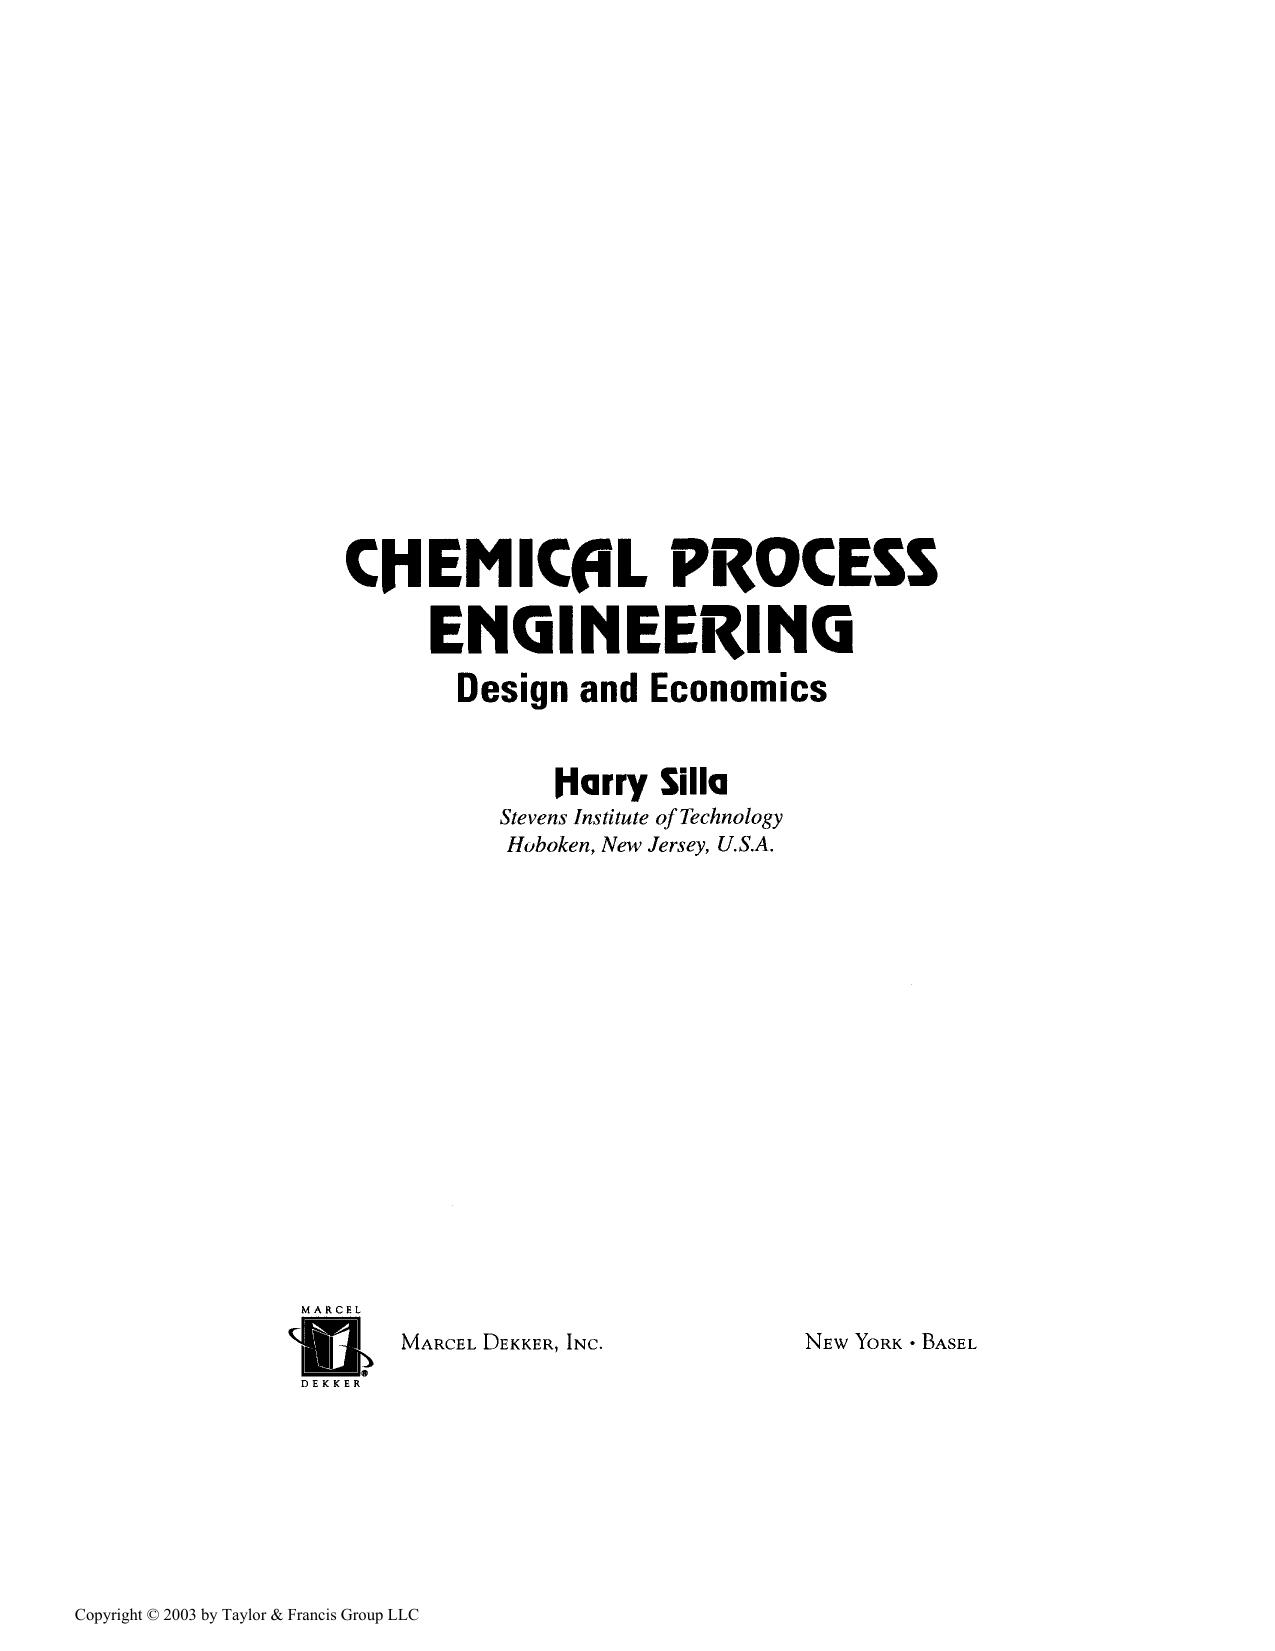 CHEMICAL PROCESS ENGINEERING Design and Economics